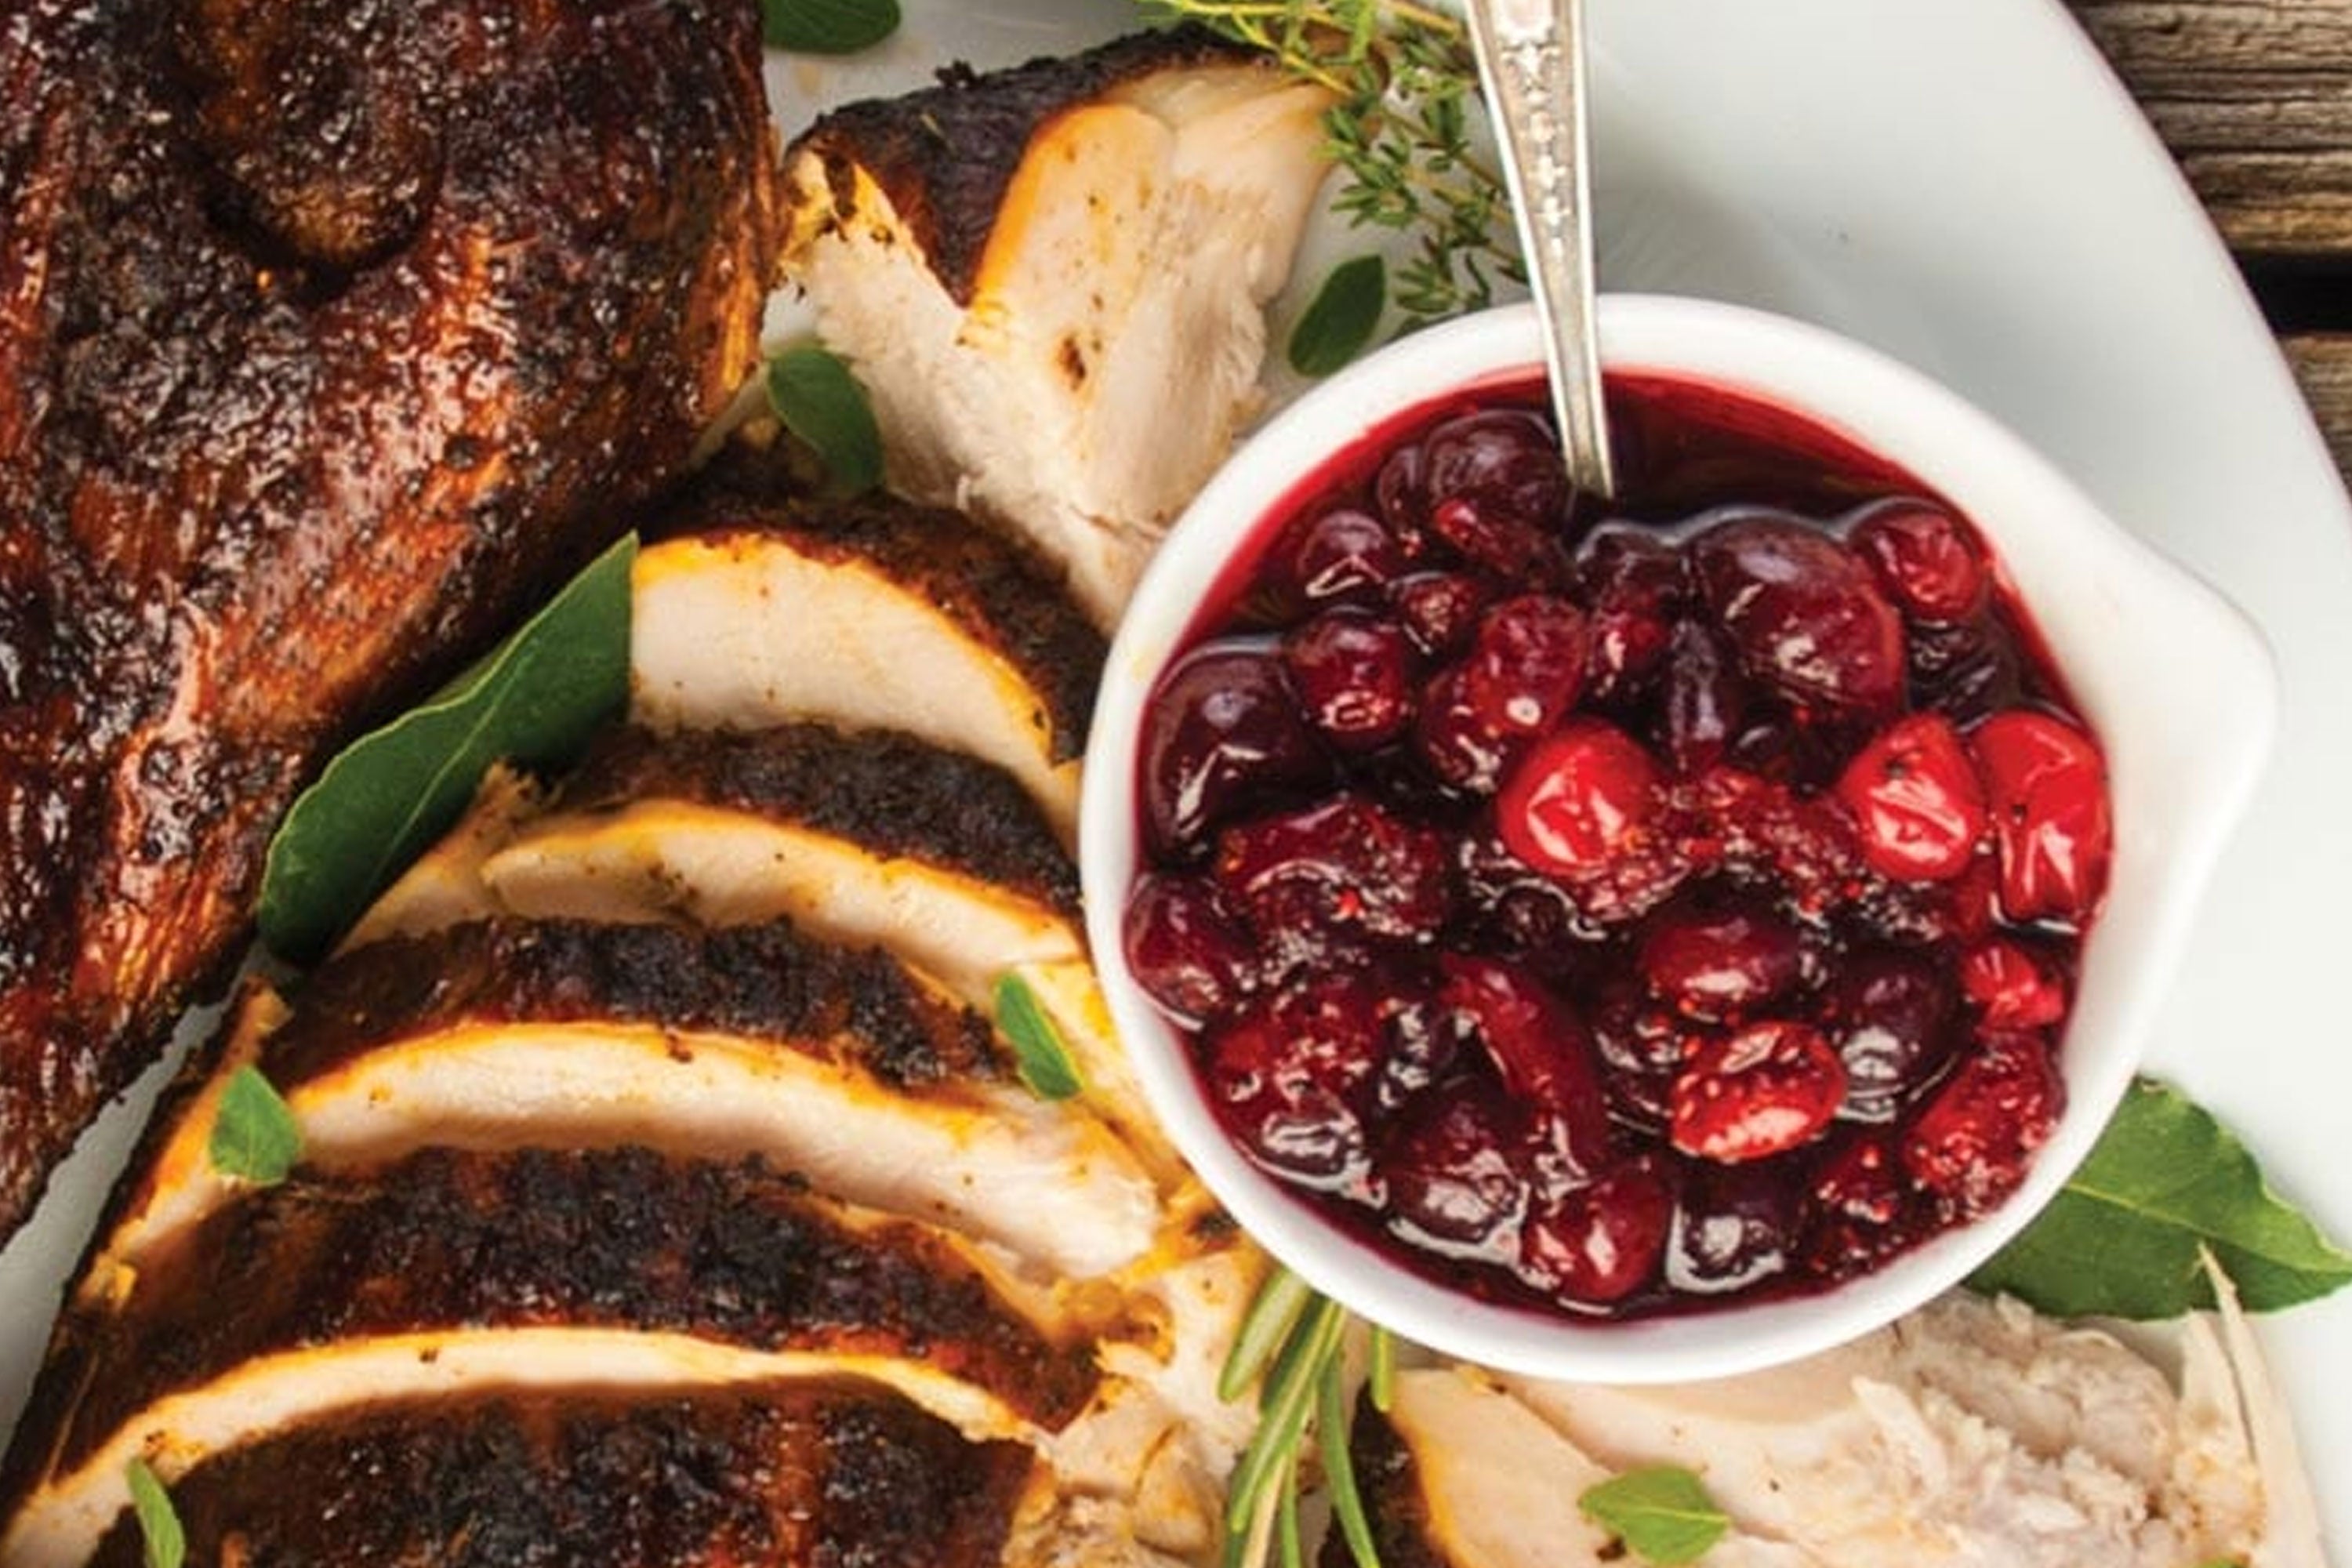 Coffee Spiced Cranberry Sauce on right with sliced turkey on left